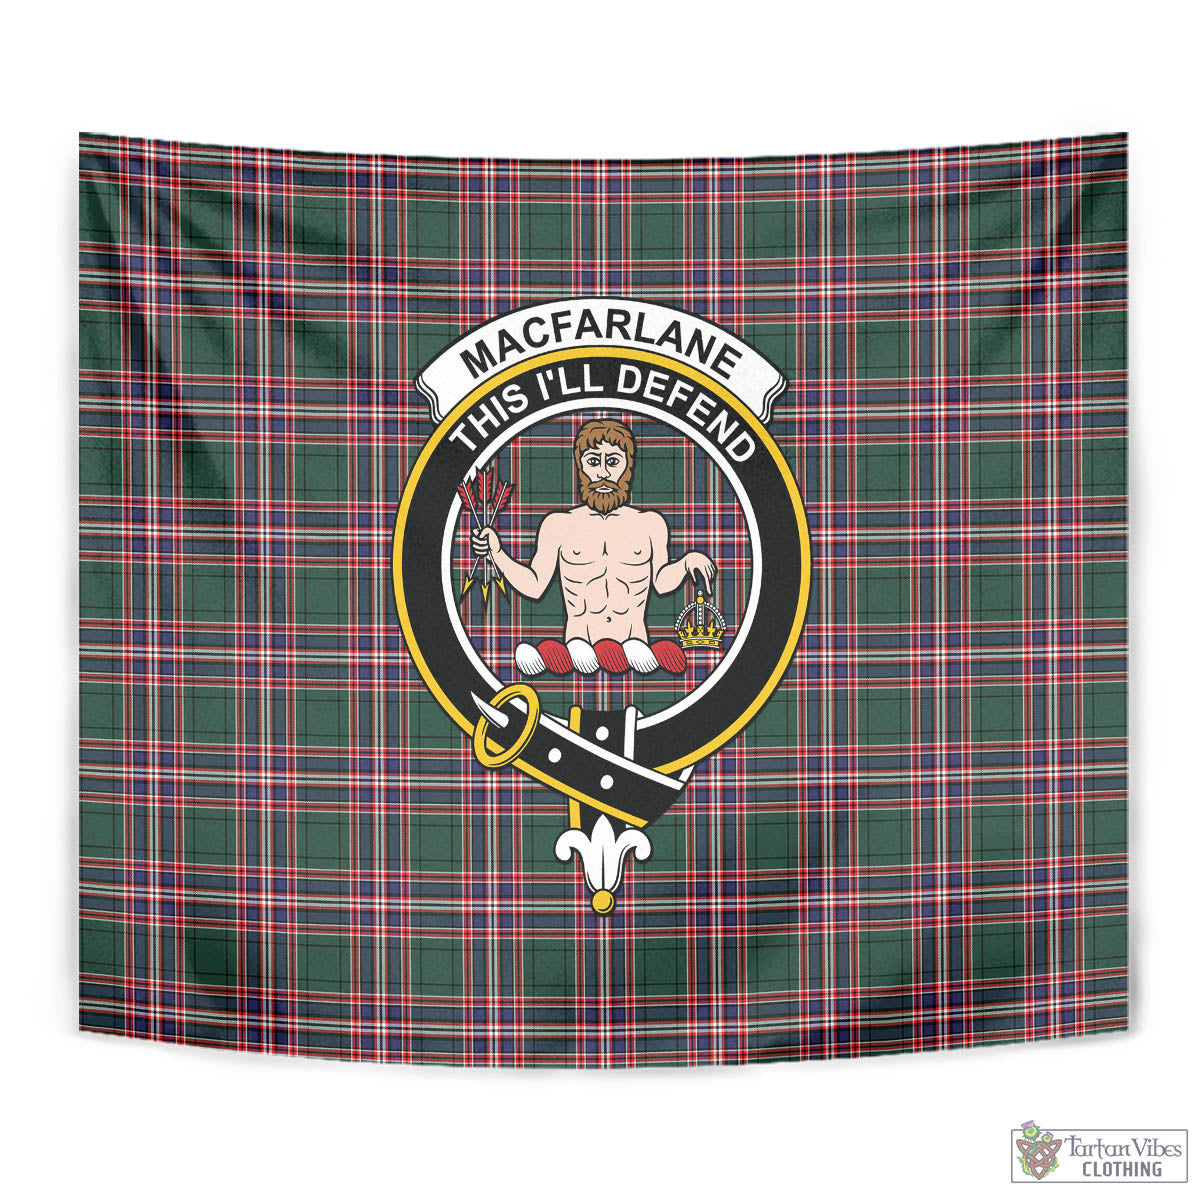 Tartan Vibes Clothing MacFarlane Hunting Modern Tartan Tapestry Wall Hanging and Home Decor for Room with Family Crest